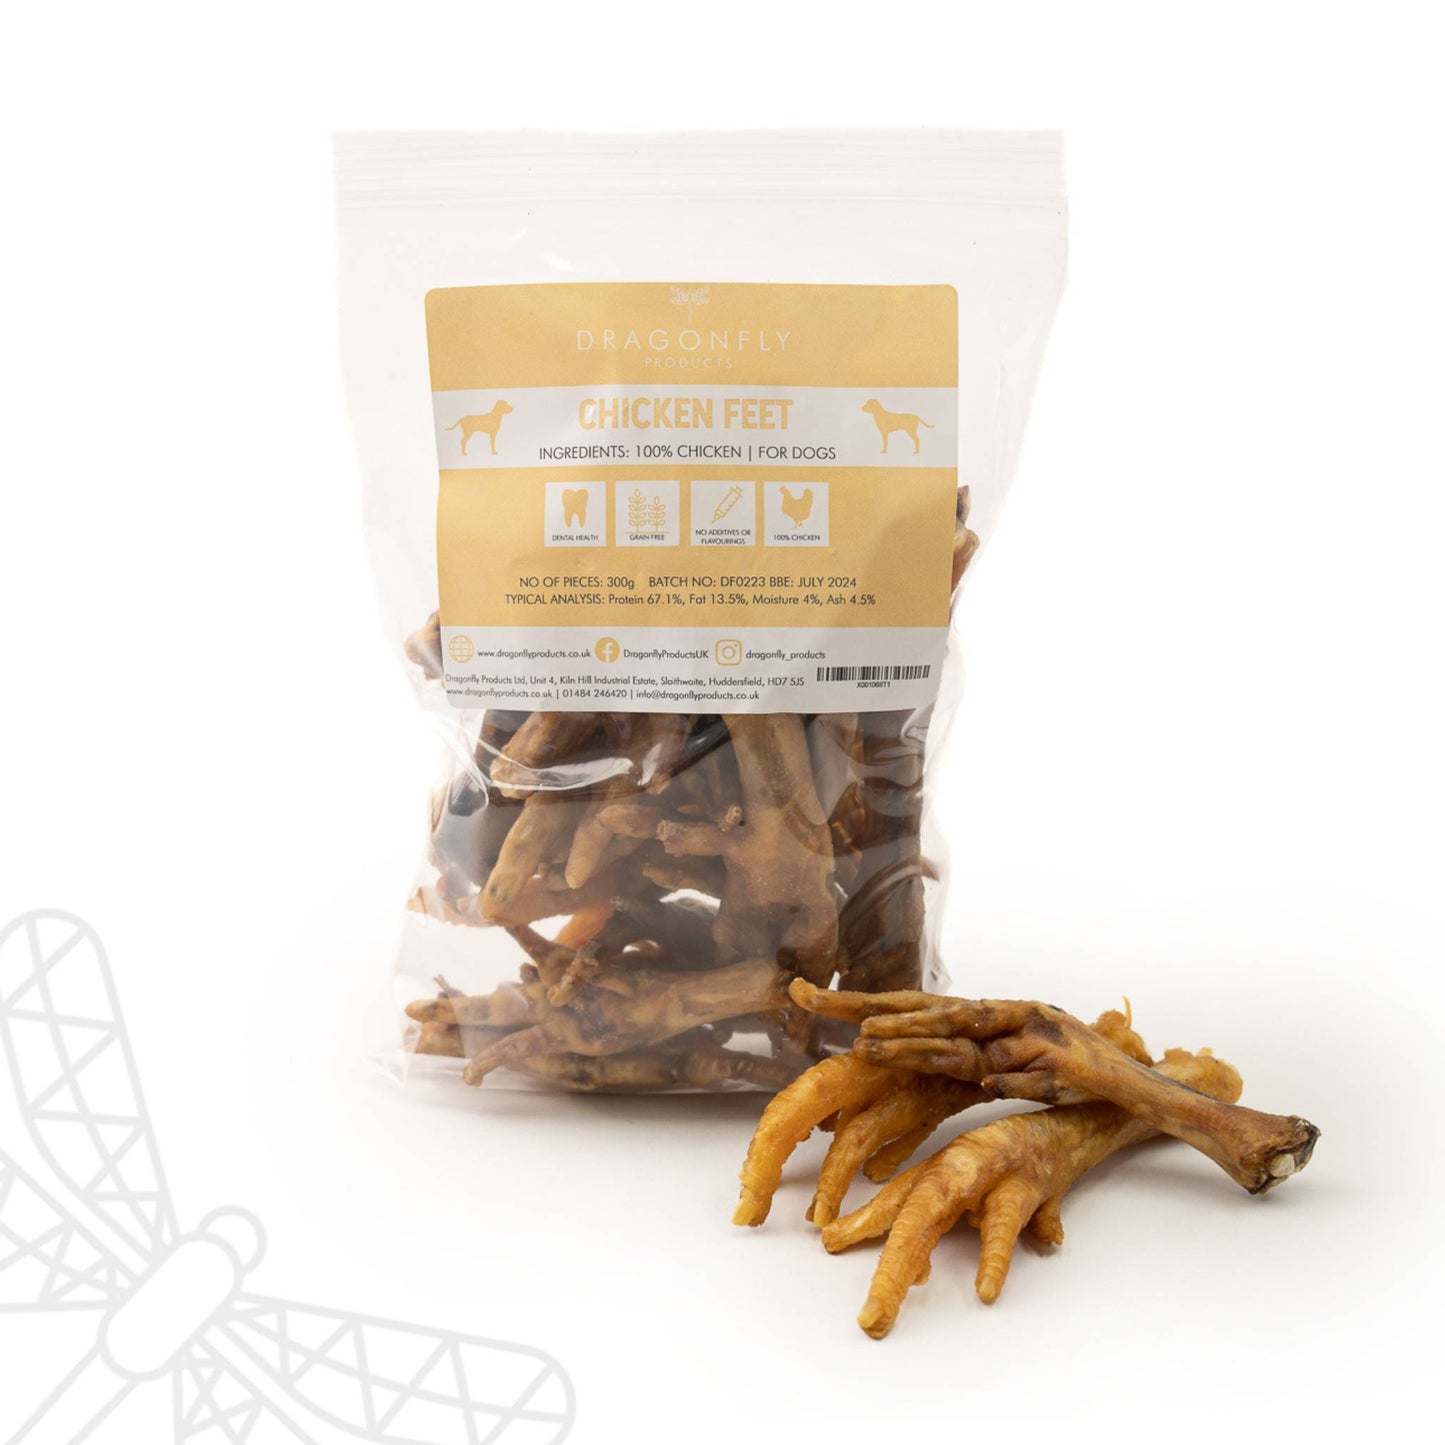 Dried chicken feet for dogs